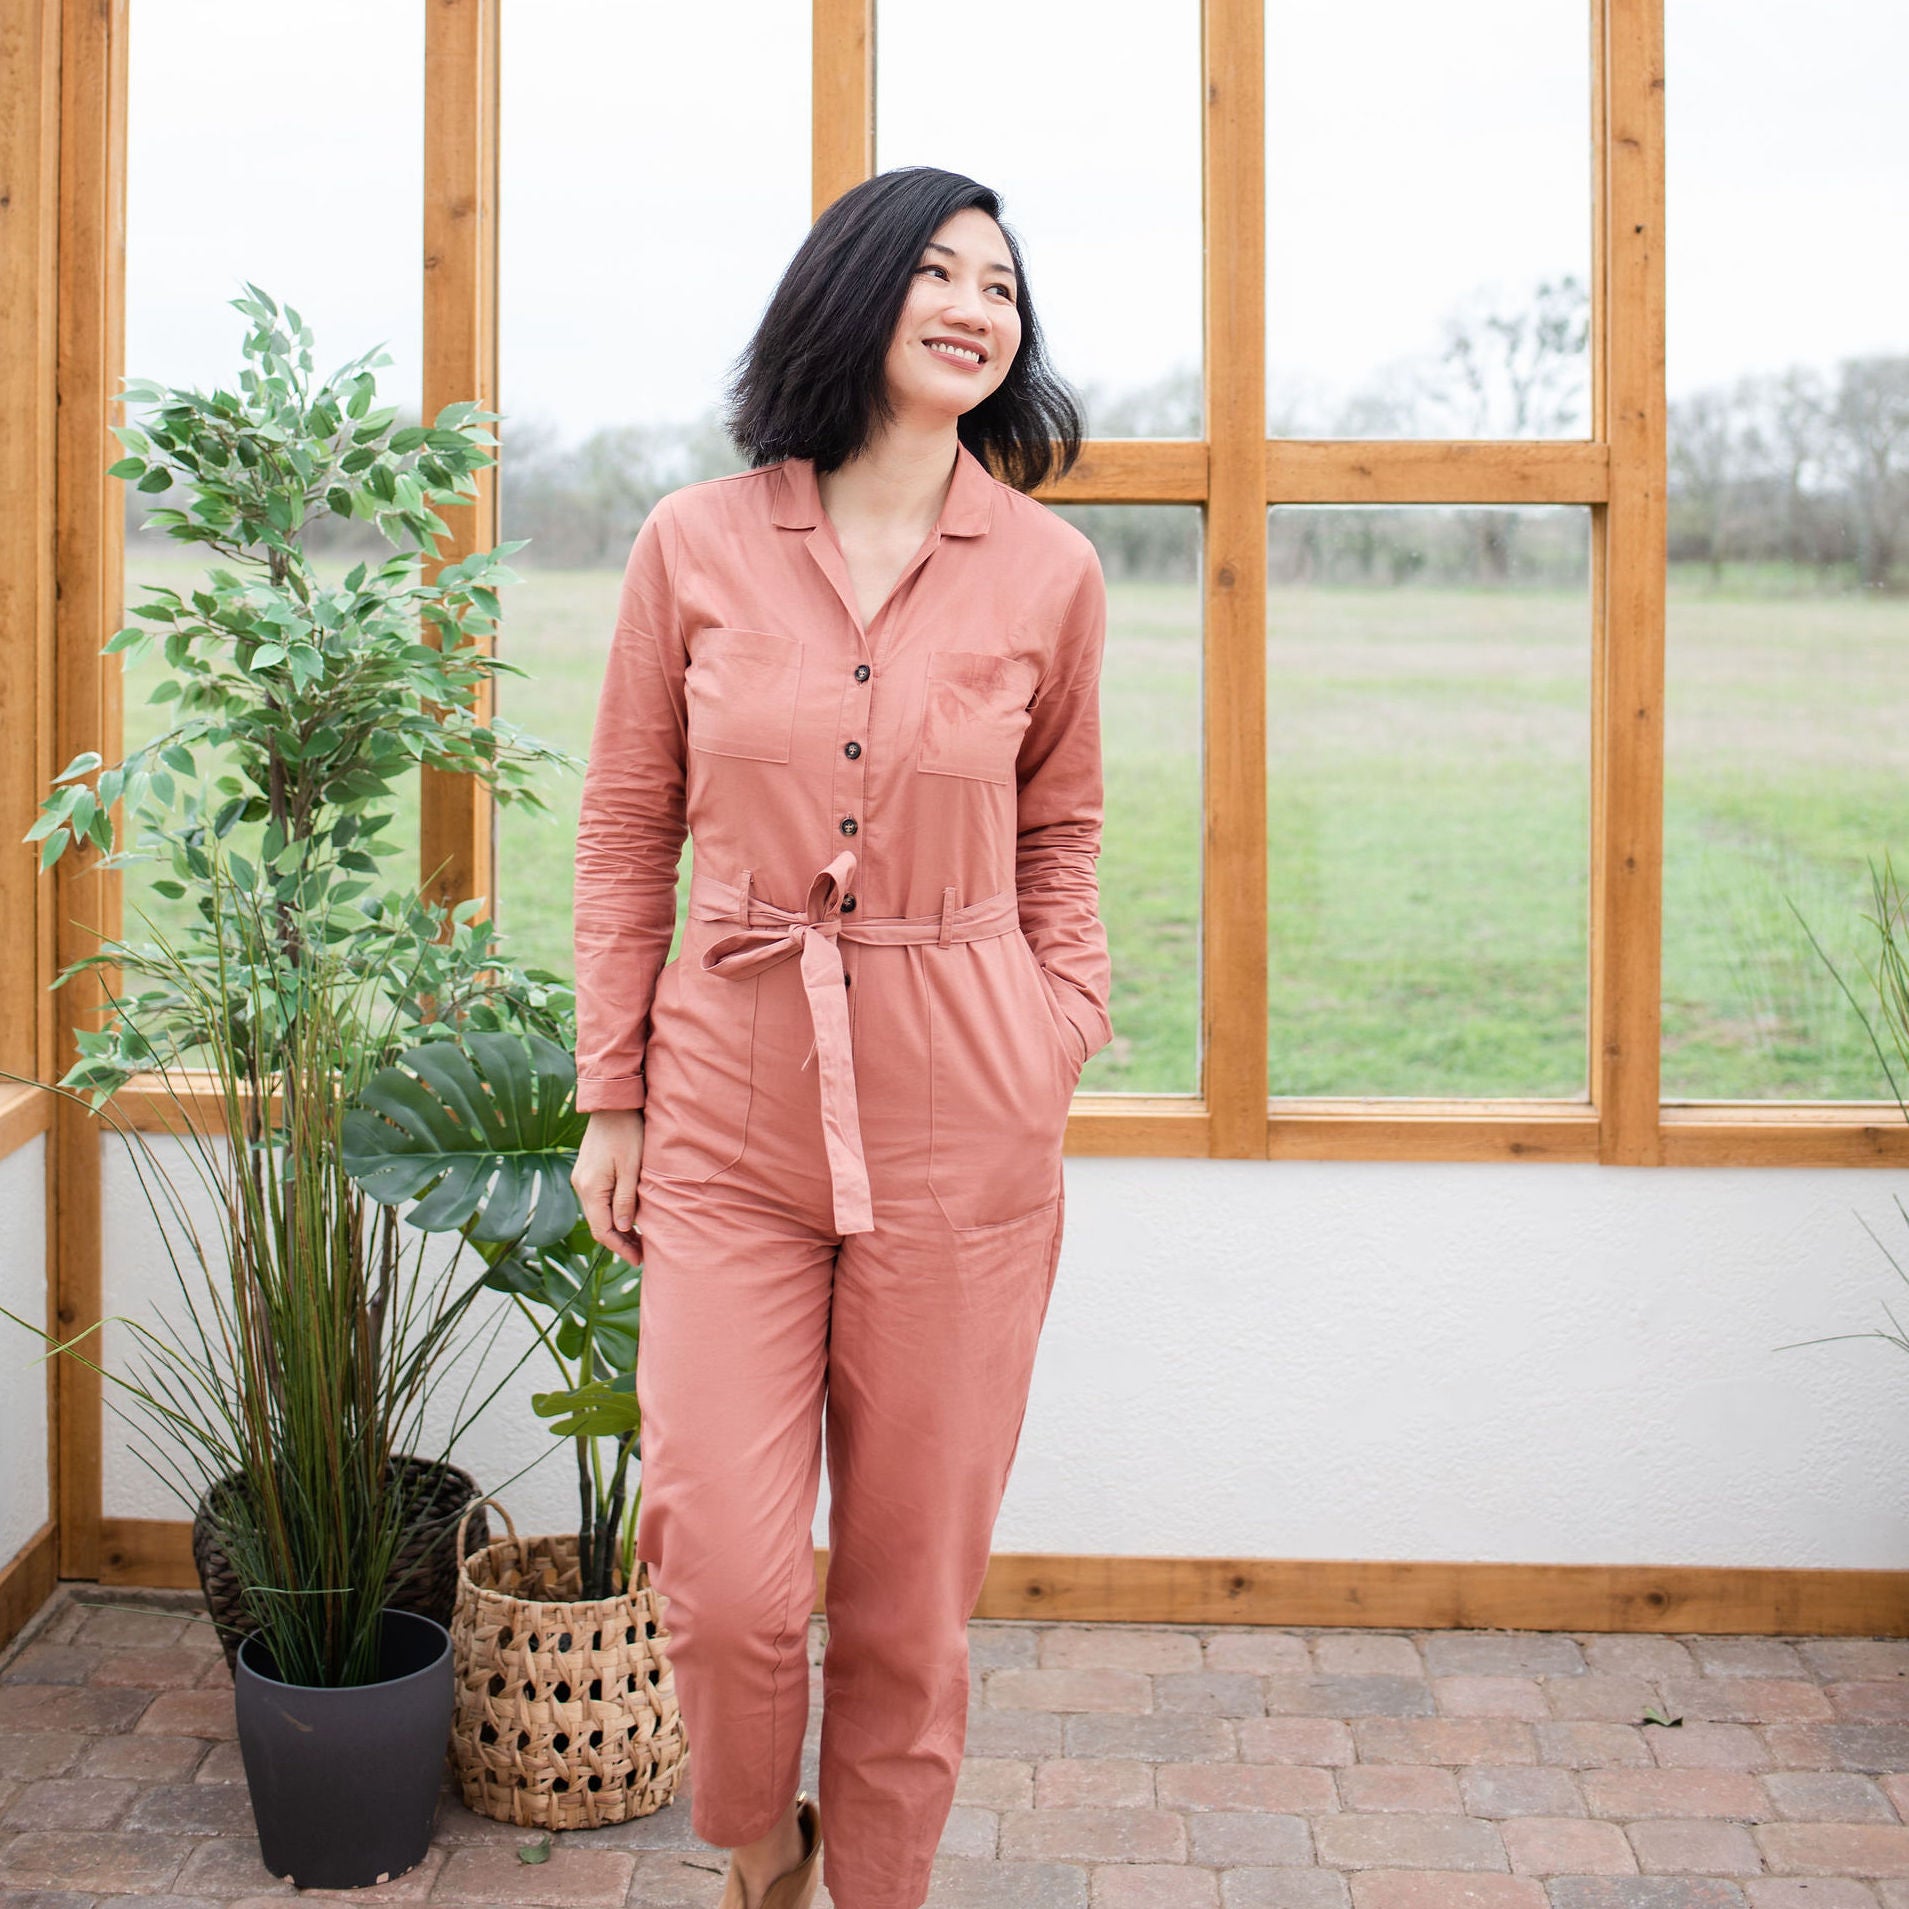 Kyte BABY founder, Ying Liu, wearing a pink jumpsuit